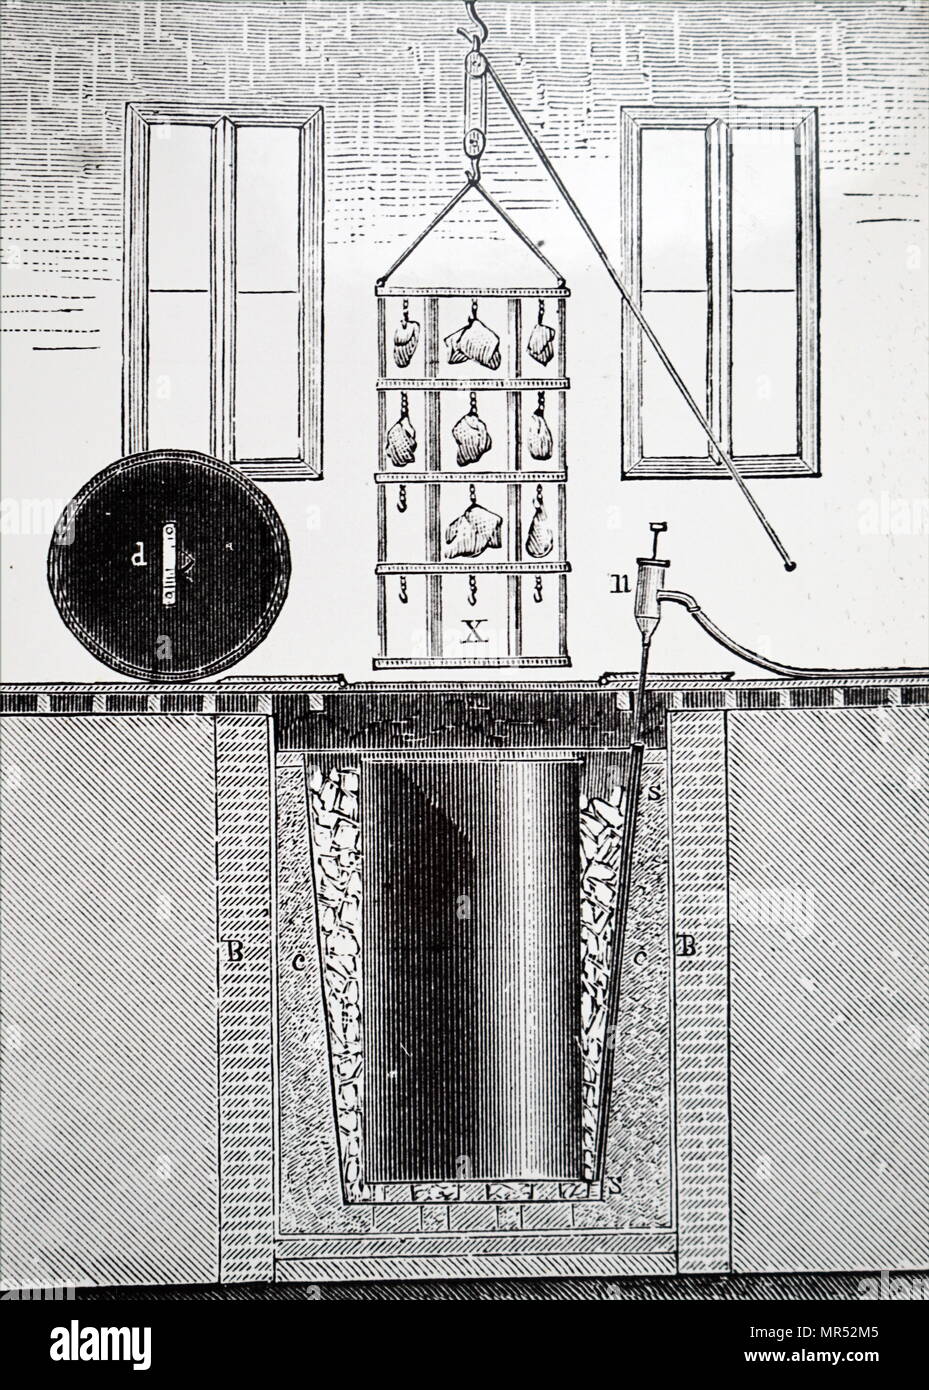 Illustration depicting a sunken cold store for a butcher's shop. Ice was packed around the iron tank. Dated 19th century Stock Photo